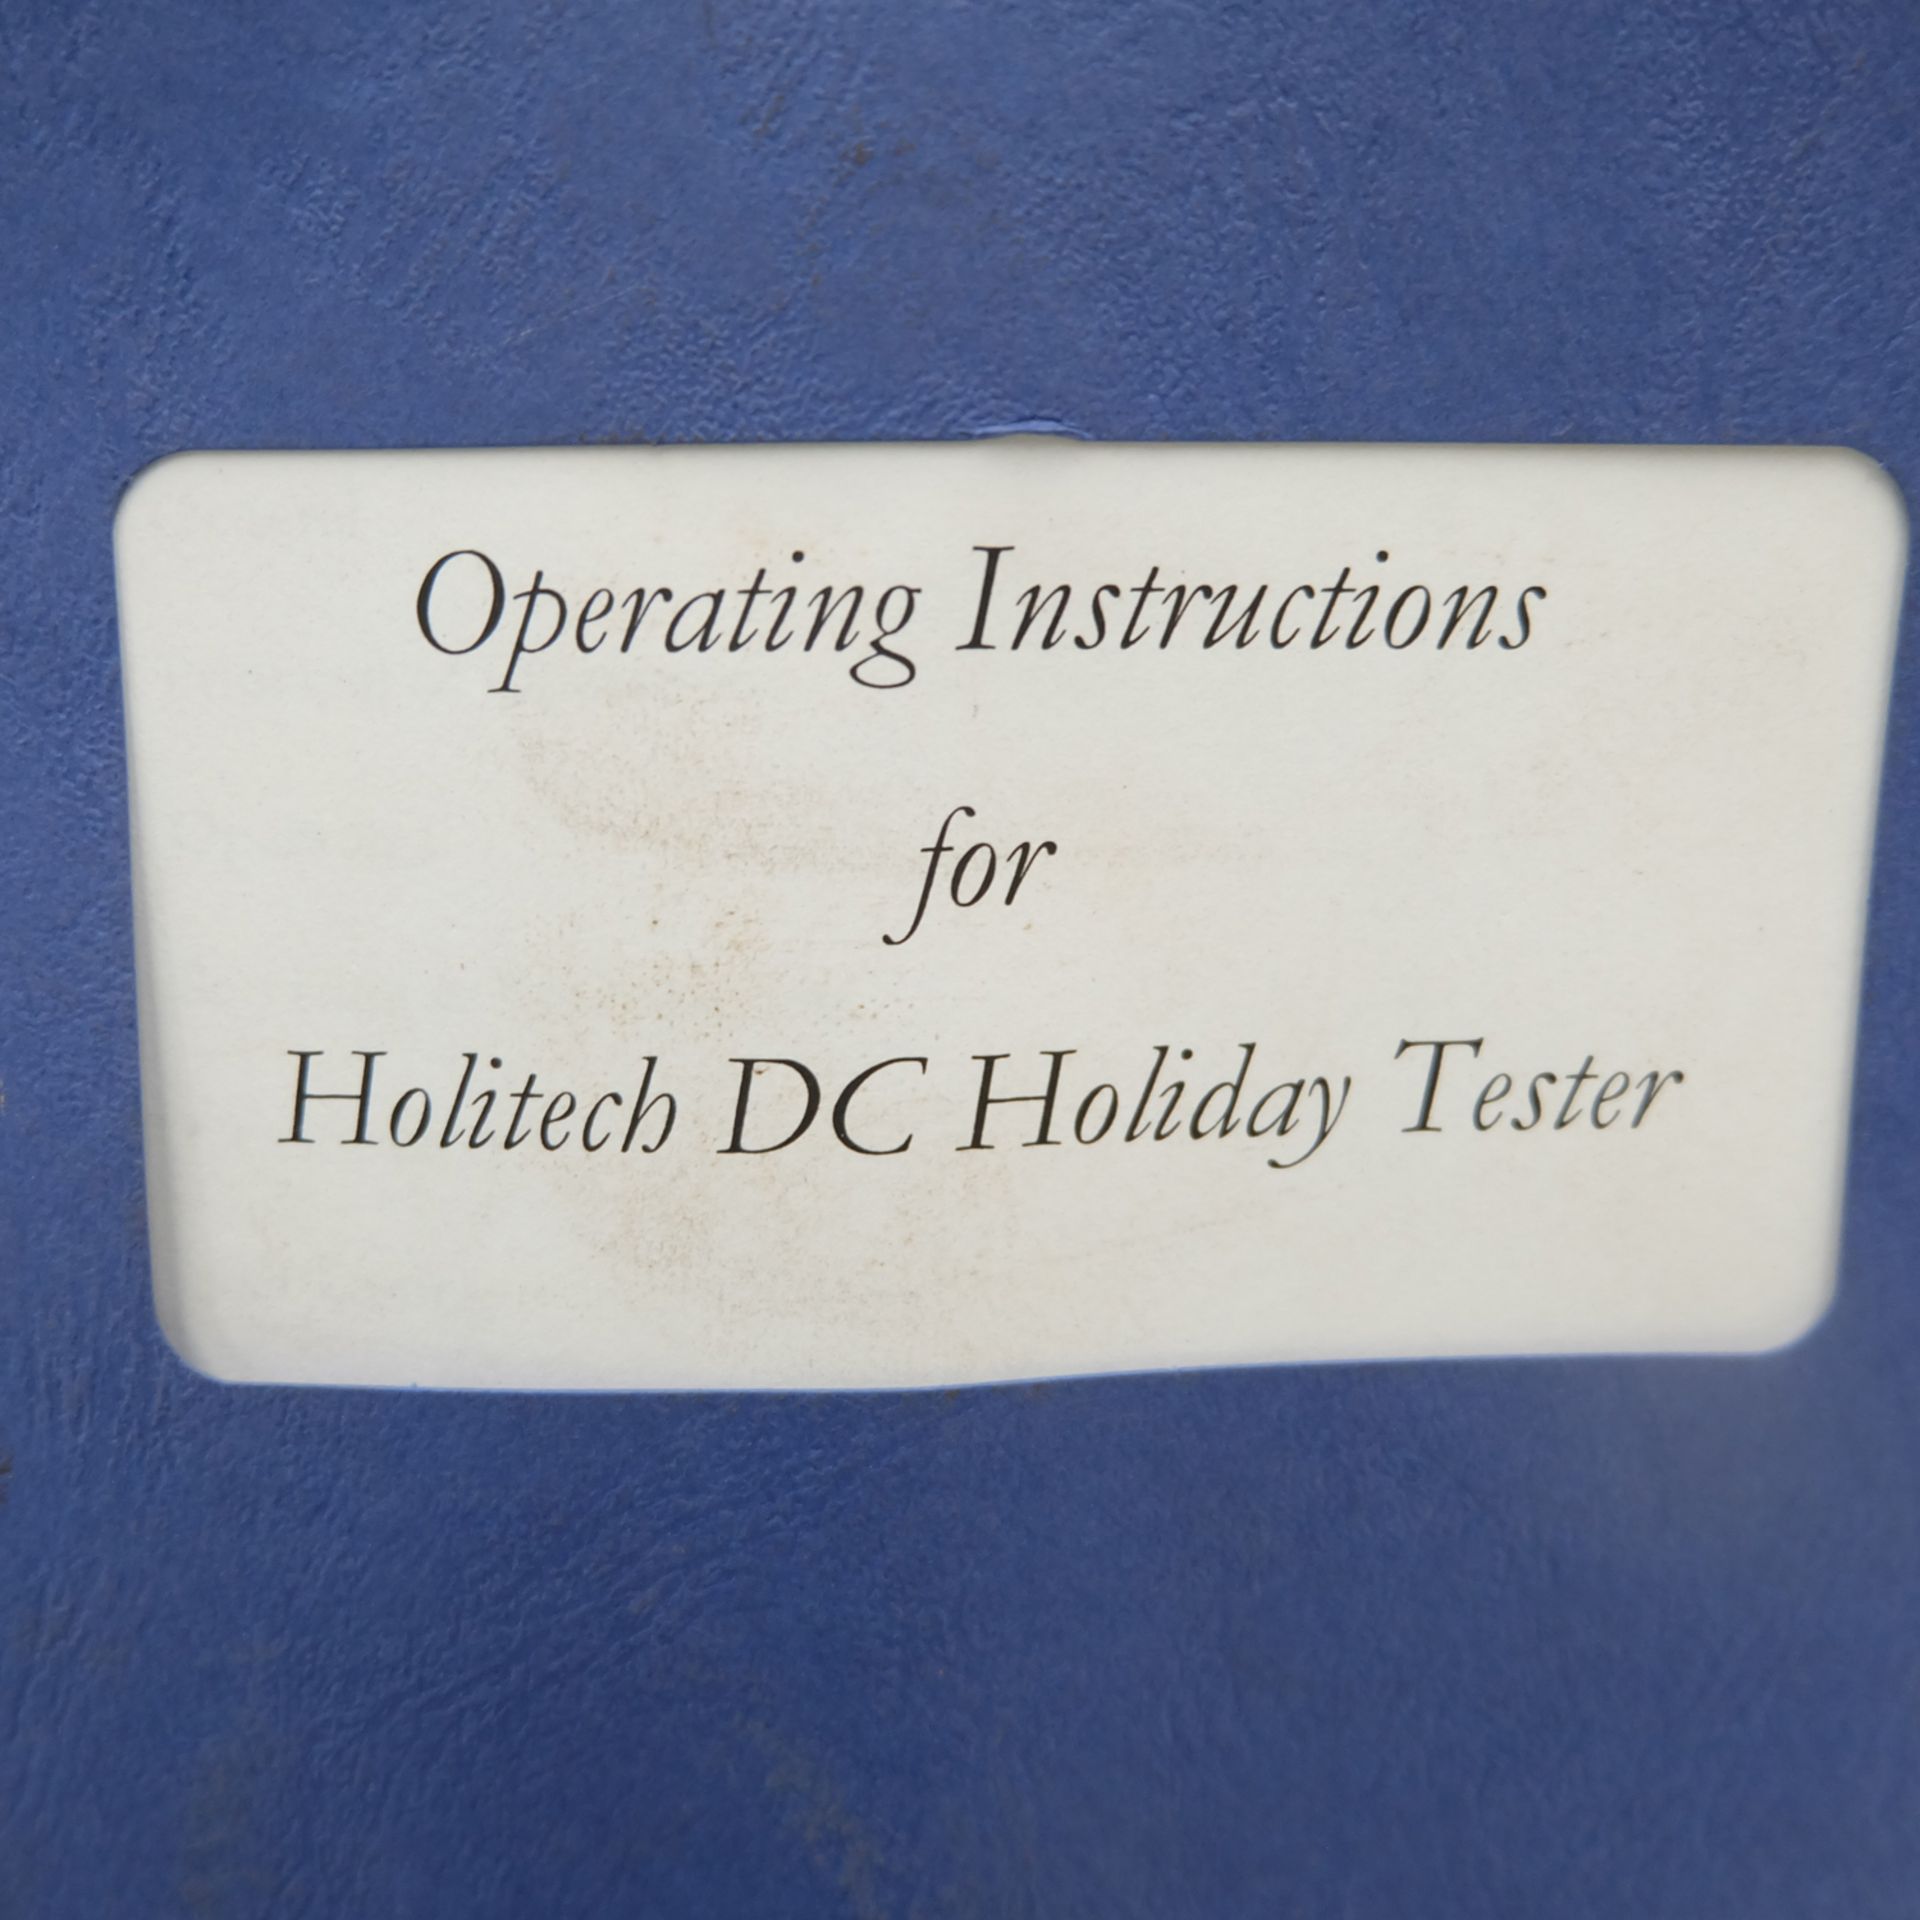 Holitech DC Holiday Tester. - Image 7 of 8